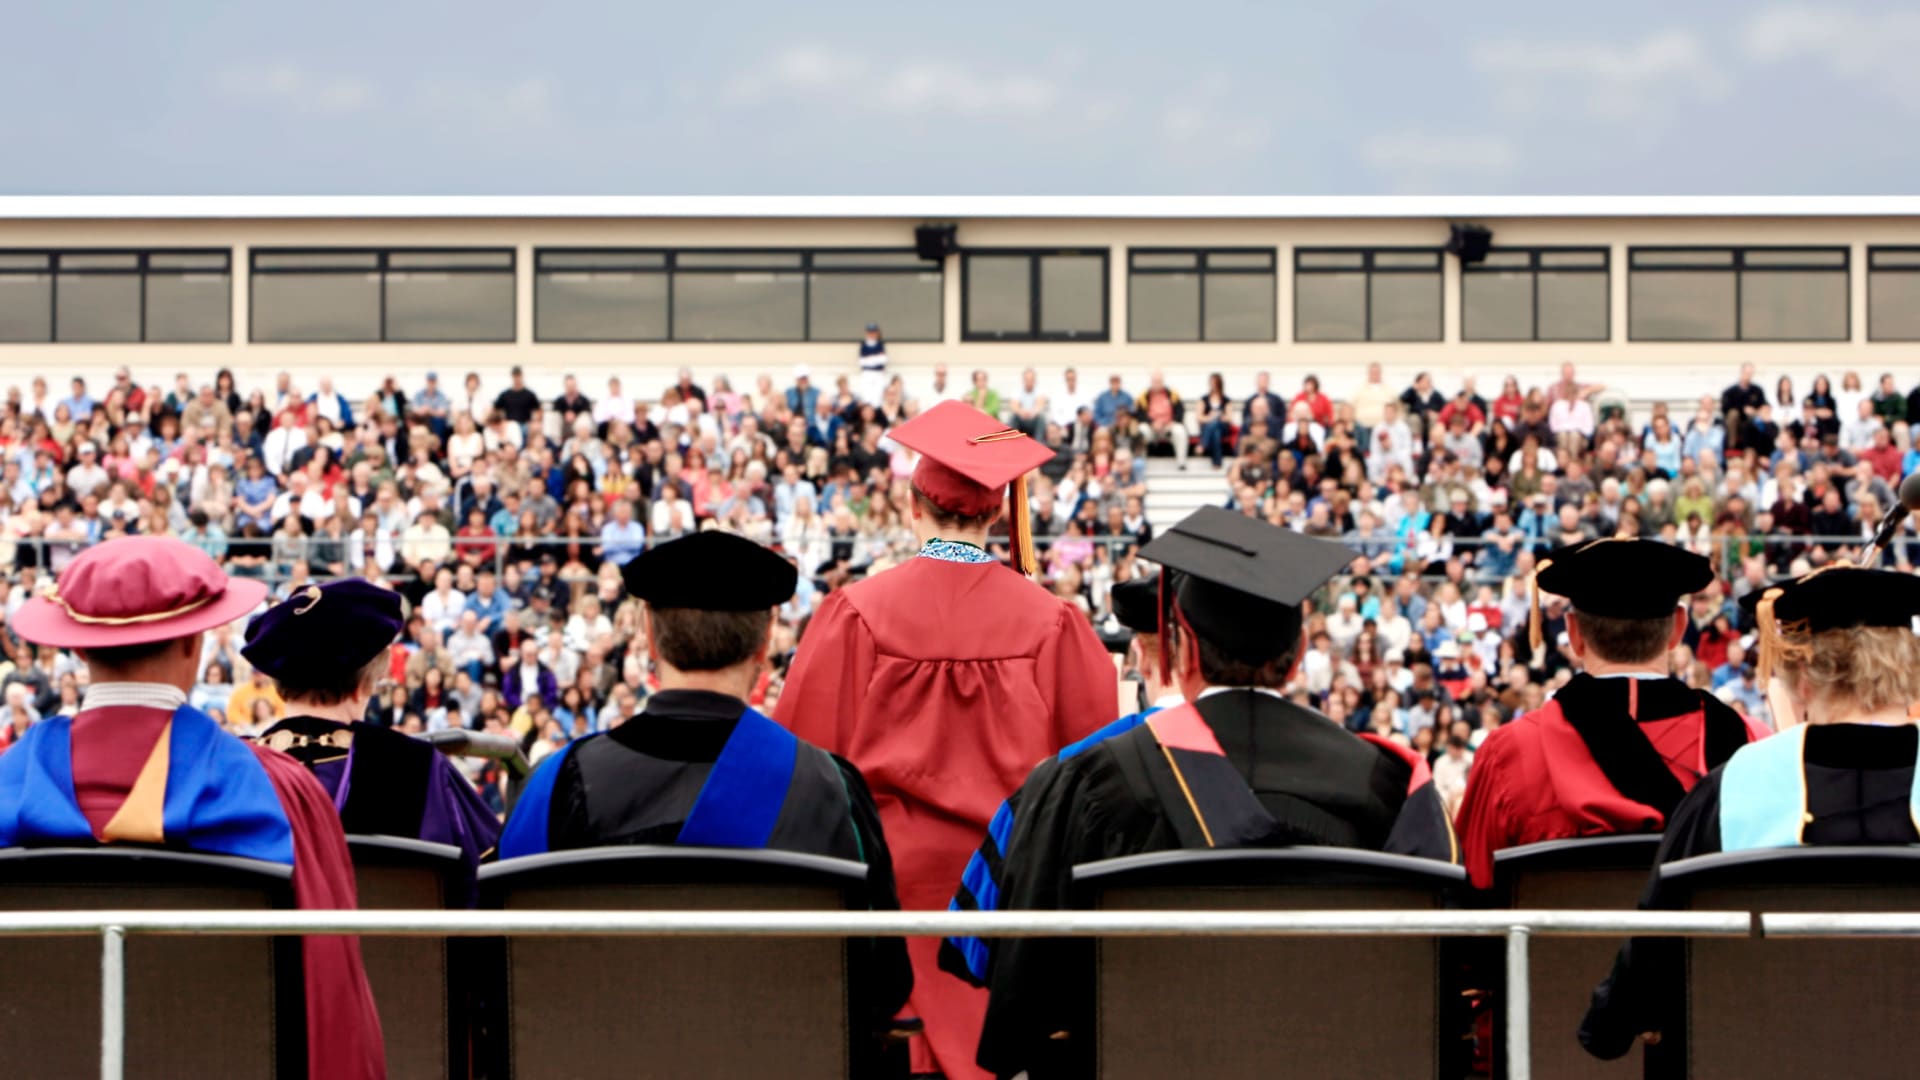 This Writer Listened to 100 Commencement Speeches So You Don't Have To